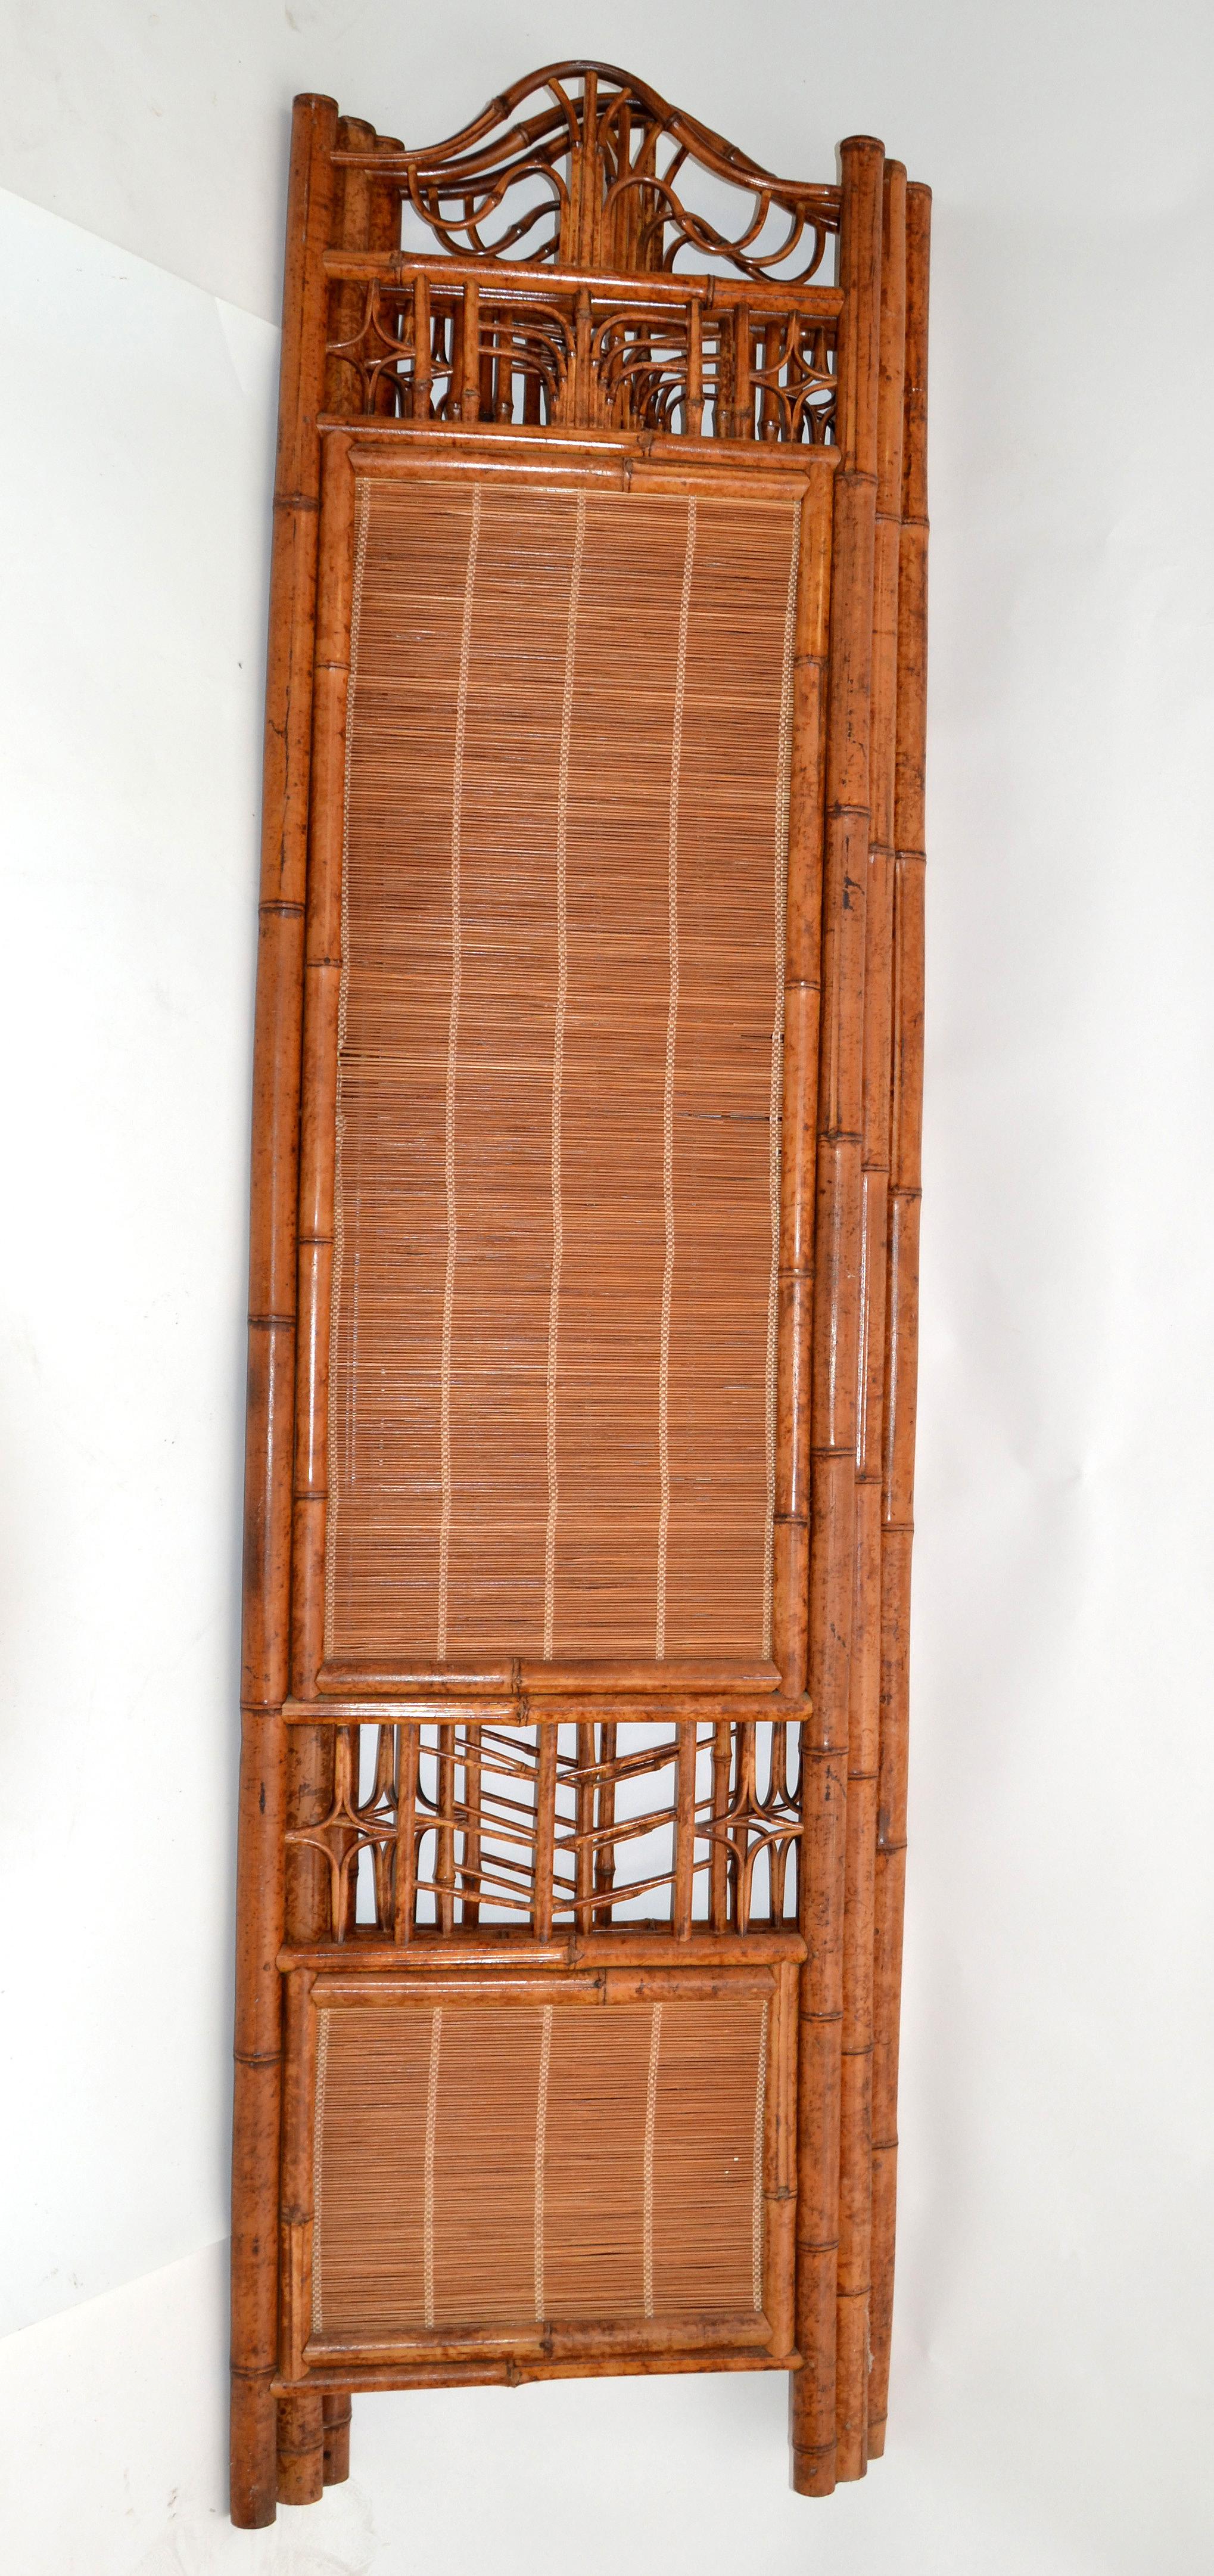 Metal One Mid-Century Modern Tall Solid Bamboo Wood Room Divider Screen Partition For Sale